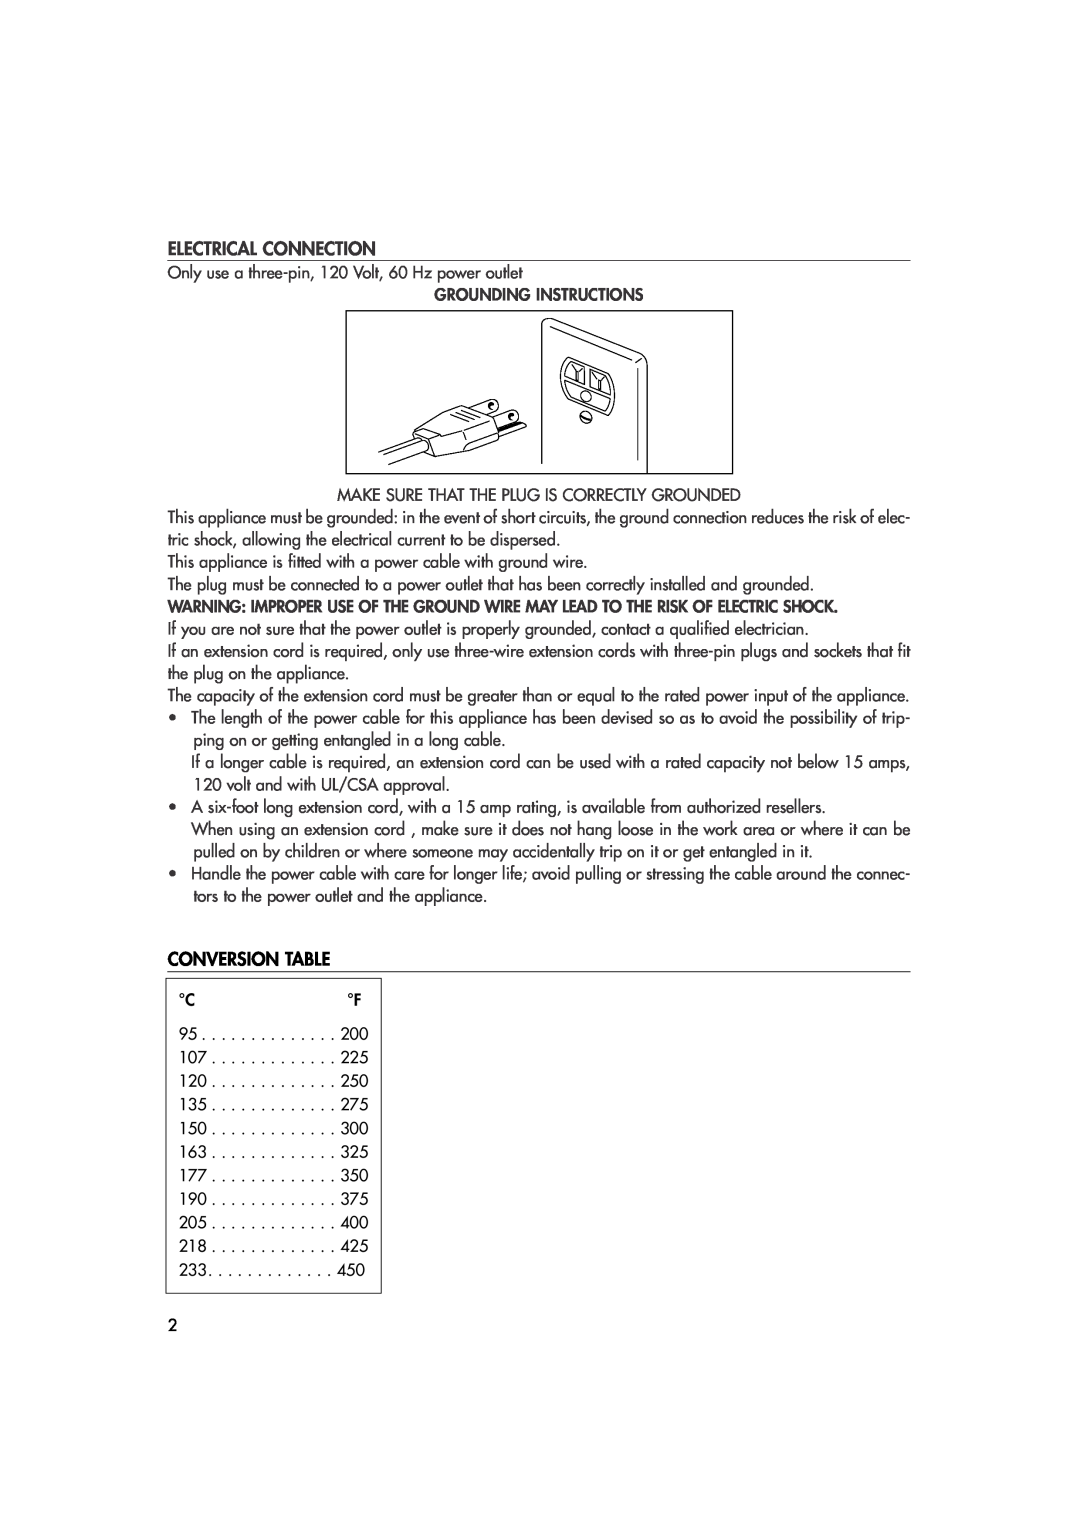 DeLonghi DO400 manual Electrical Connection, Conversion Table 